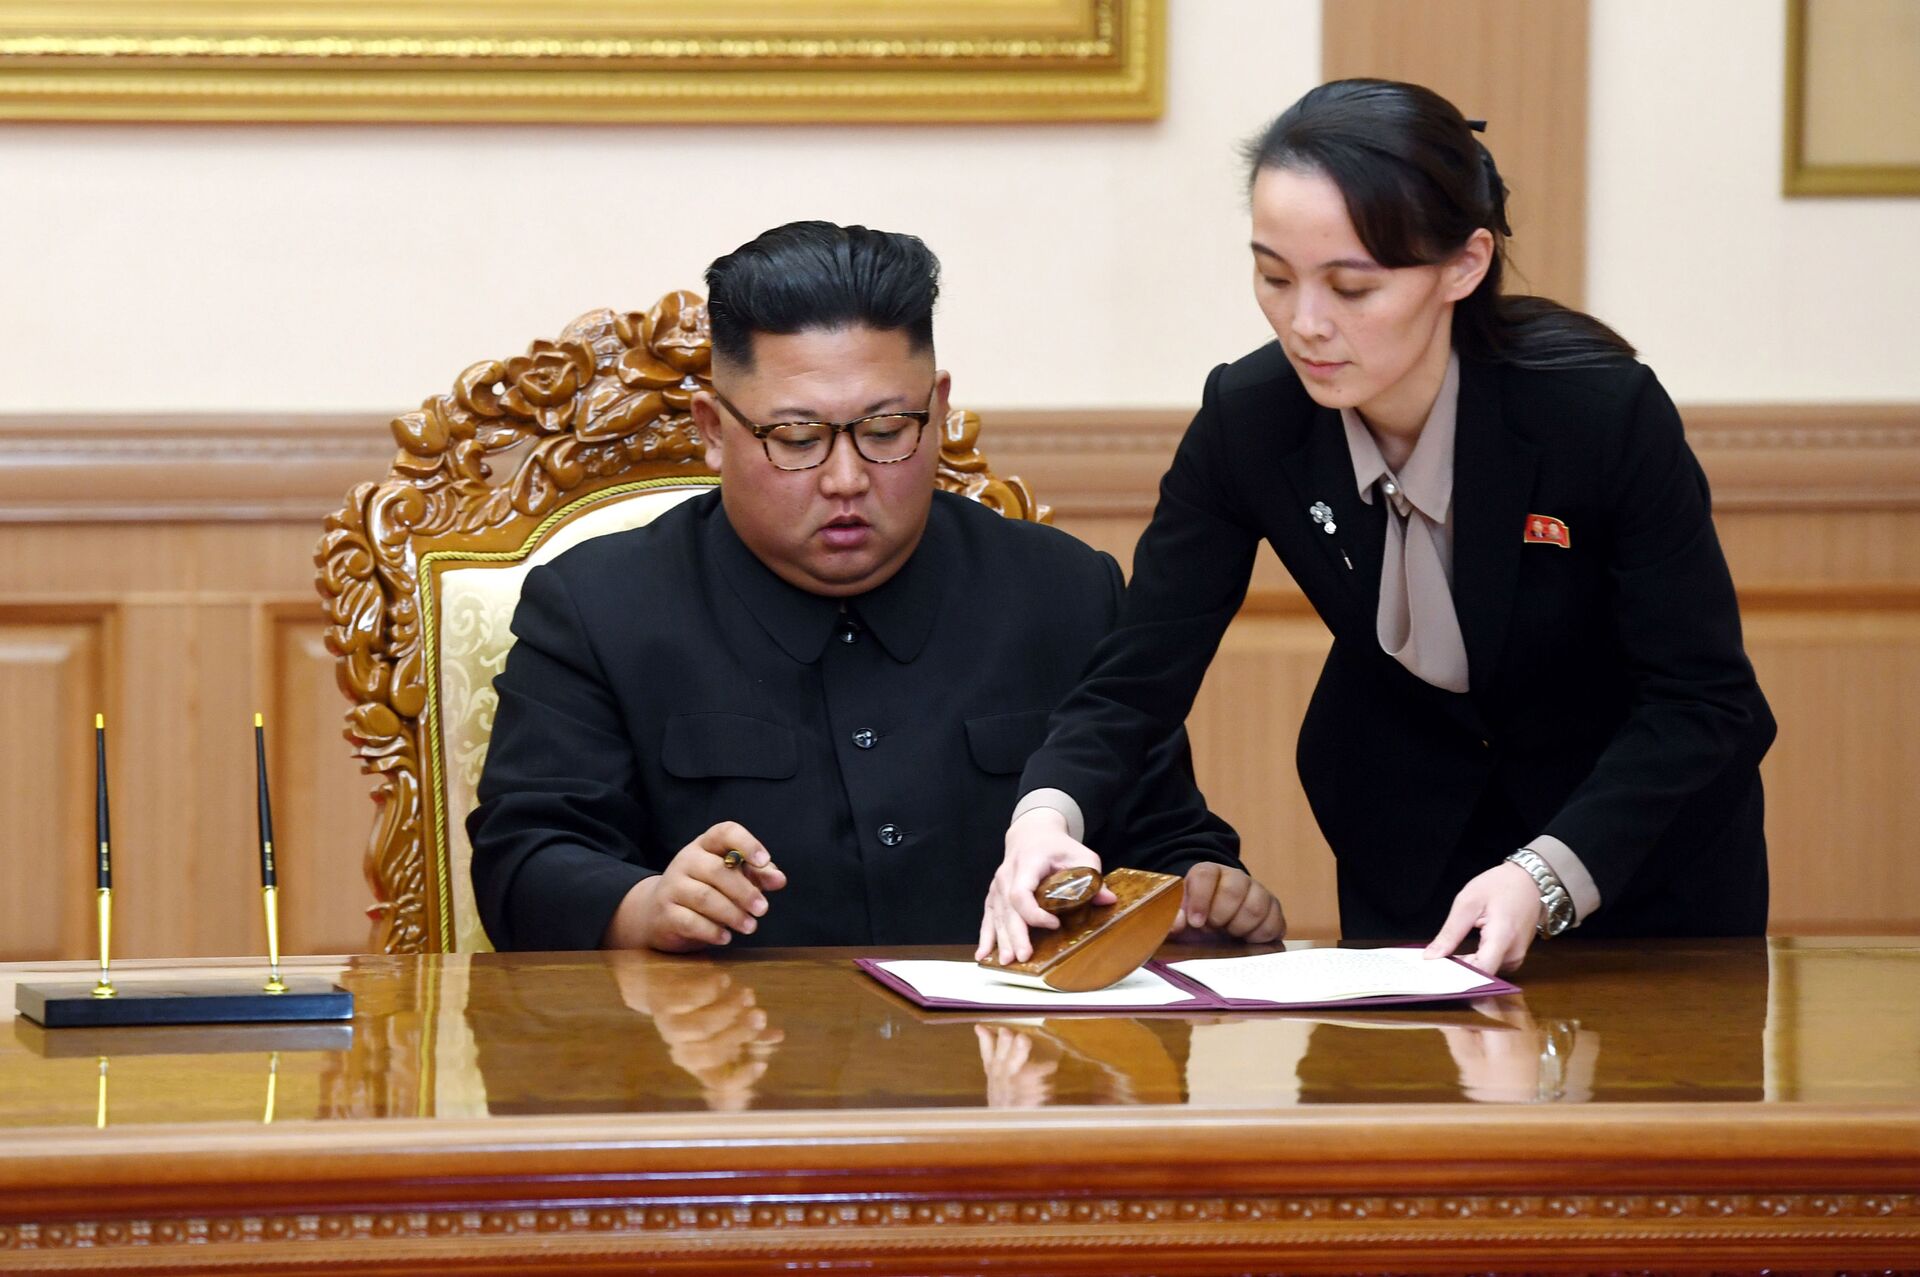 In this Sept. 19, 2018, file photo, Kim Yo Jong, right, sister of North Korean leader Kim Jong Un, helps Kim sign joint statement following the summit with South Korean President Moon Jae-in at the Paekhwawon State Guesthouse in Pyongyang, North Korea. Kim's prolonged public absence has led to rumors of ill health and worries about how it could influence the future of what one analyst calls Northeast Asia's Achilles' heel, a reference to the North's belligerence and unpredictable nature. - Sputnik International, 1920, 07.09.2021